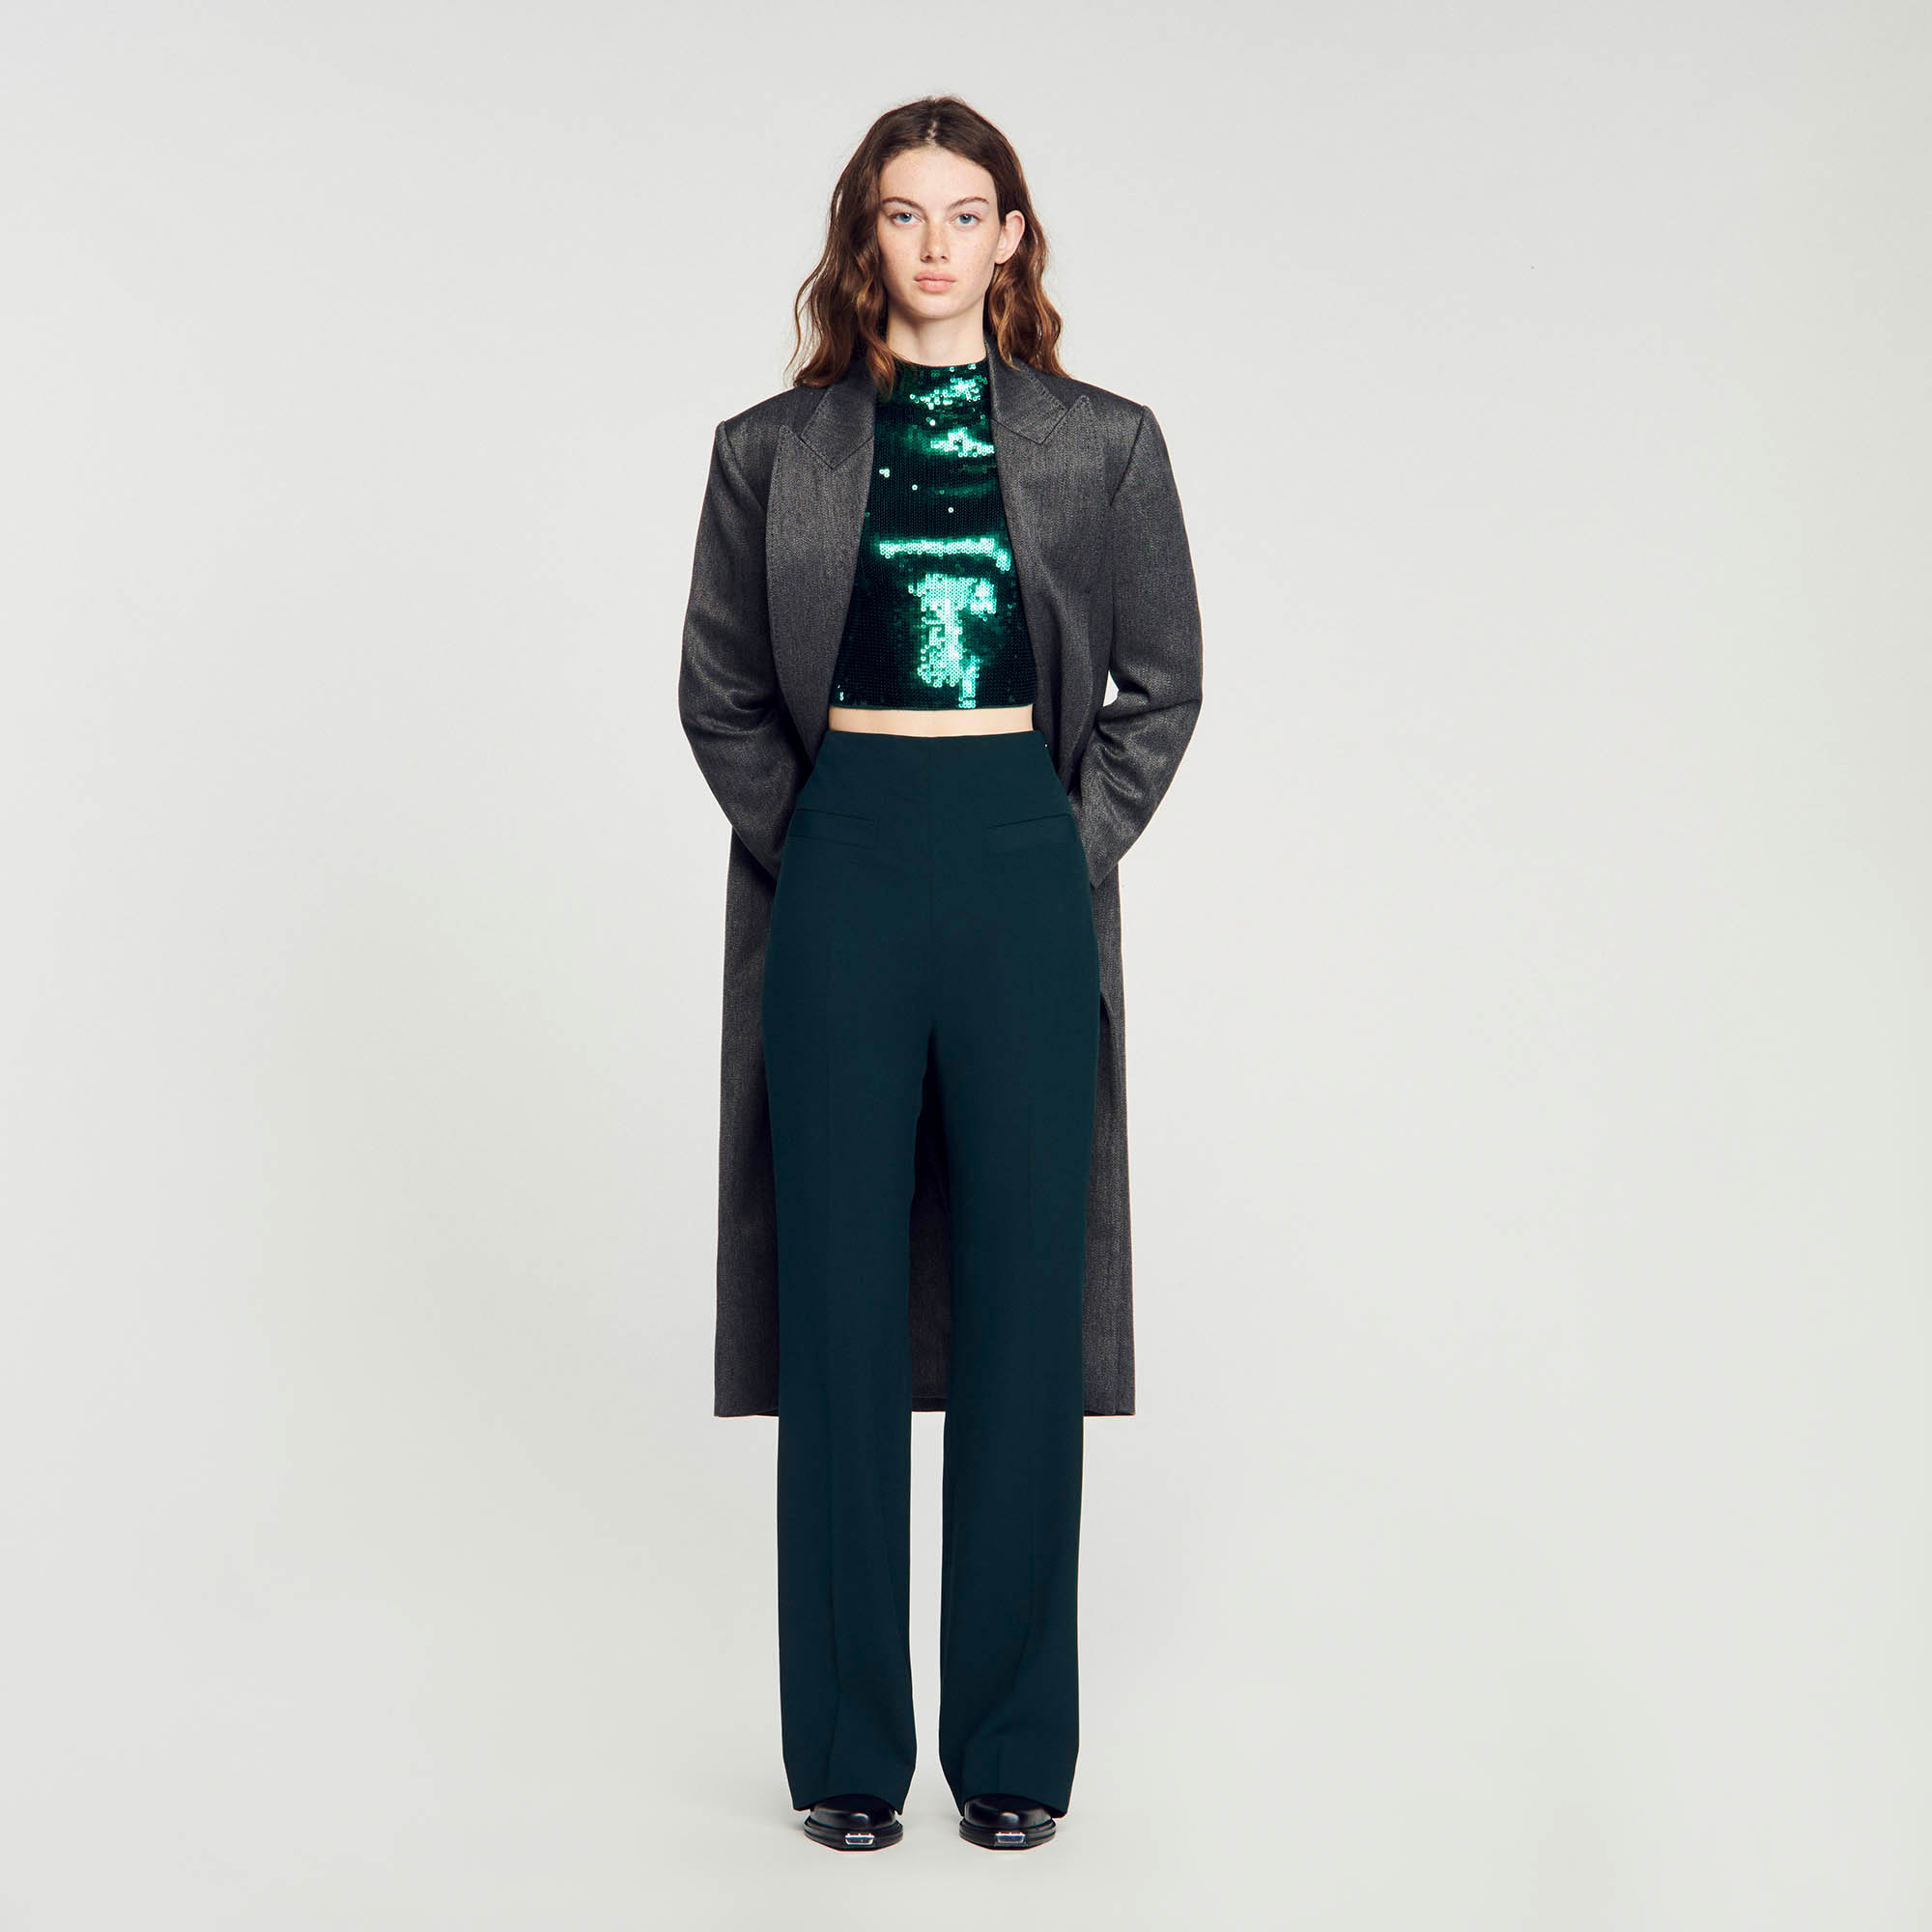 Sandro polyester Flared pants with ironed creases, piped pockets on the waist and darts at the back